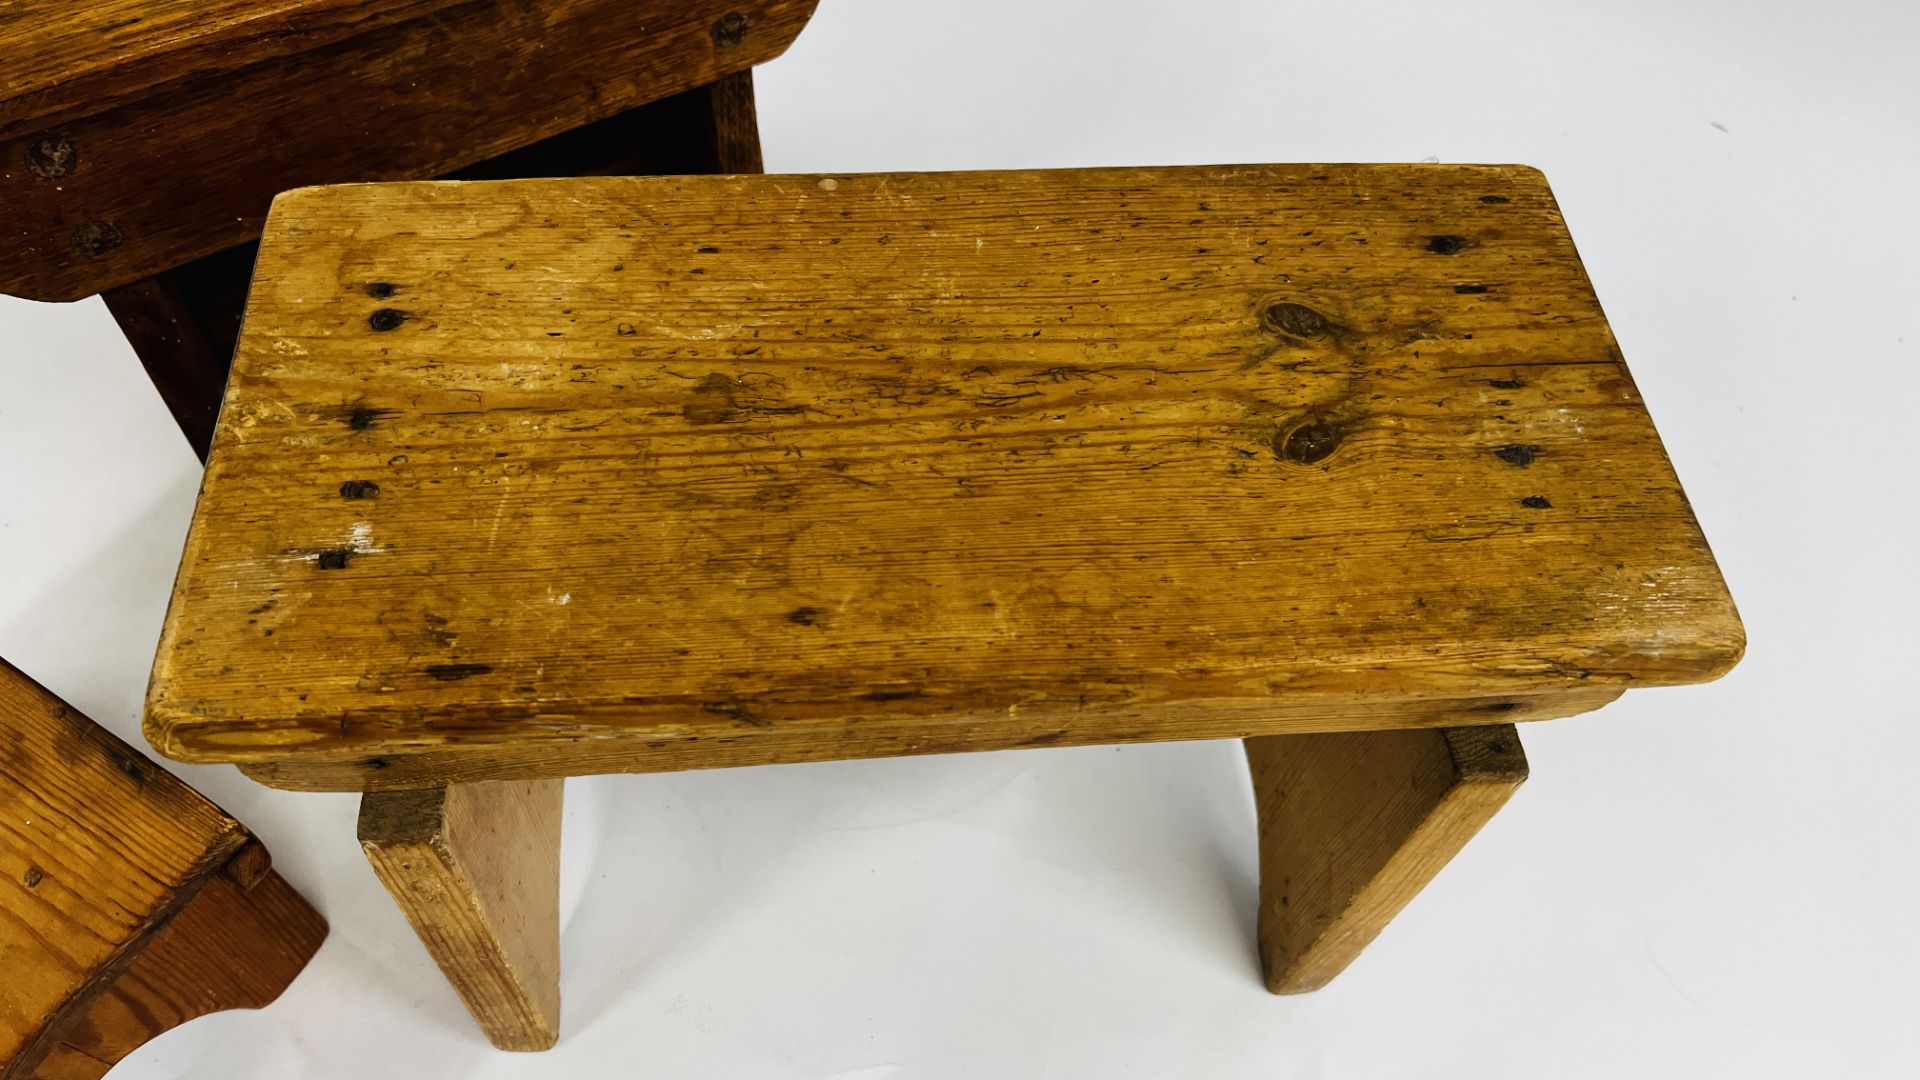 A GROUP OF 3 VINTAGE LOW/MILKING STOOLS TO INCLUDE A SOLID OAK EXAMPLE (VARIOUS SIZES). - Image 3 of 10